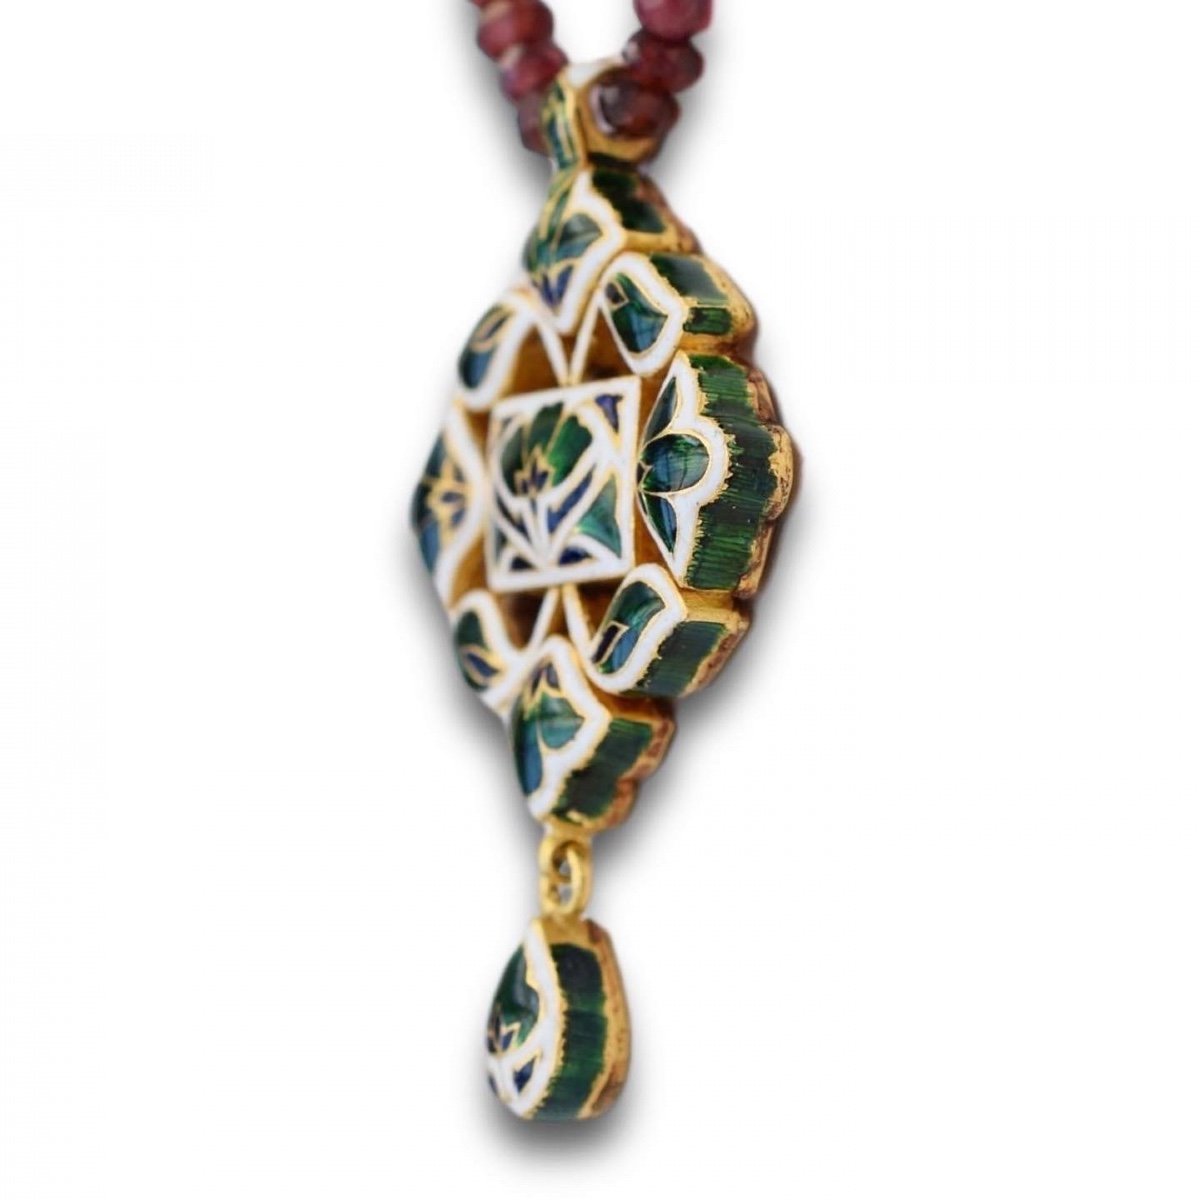 Enamel And Gold Pendant With Diamonds And A Table Cut Garnet. Indian, Circa 1900-photo-1